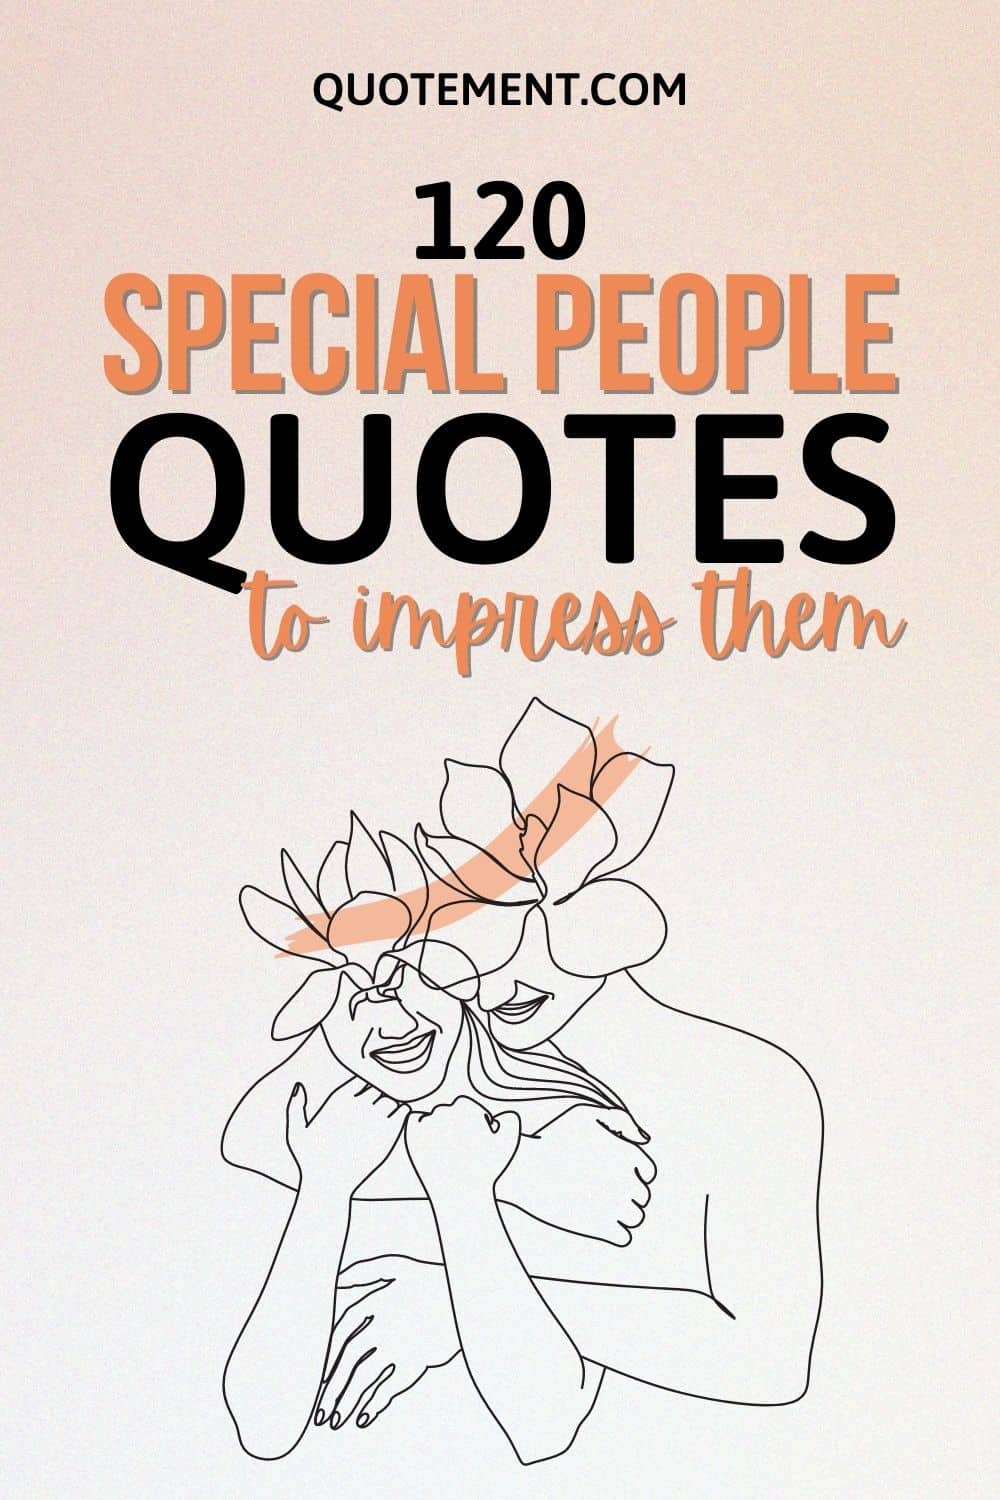 120 Special People Quotes To Praise Their Uniqueness